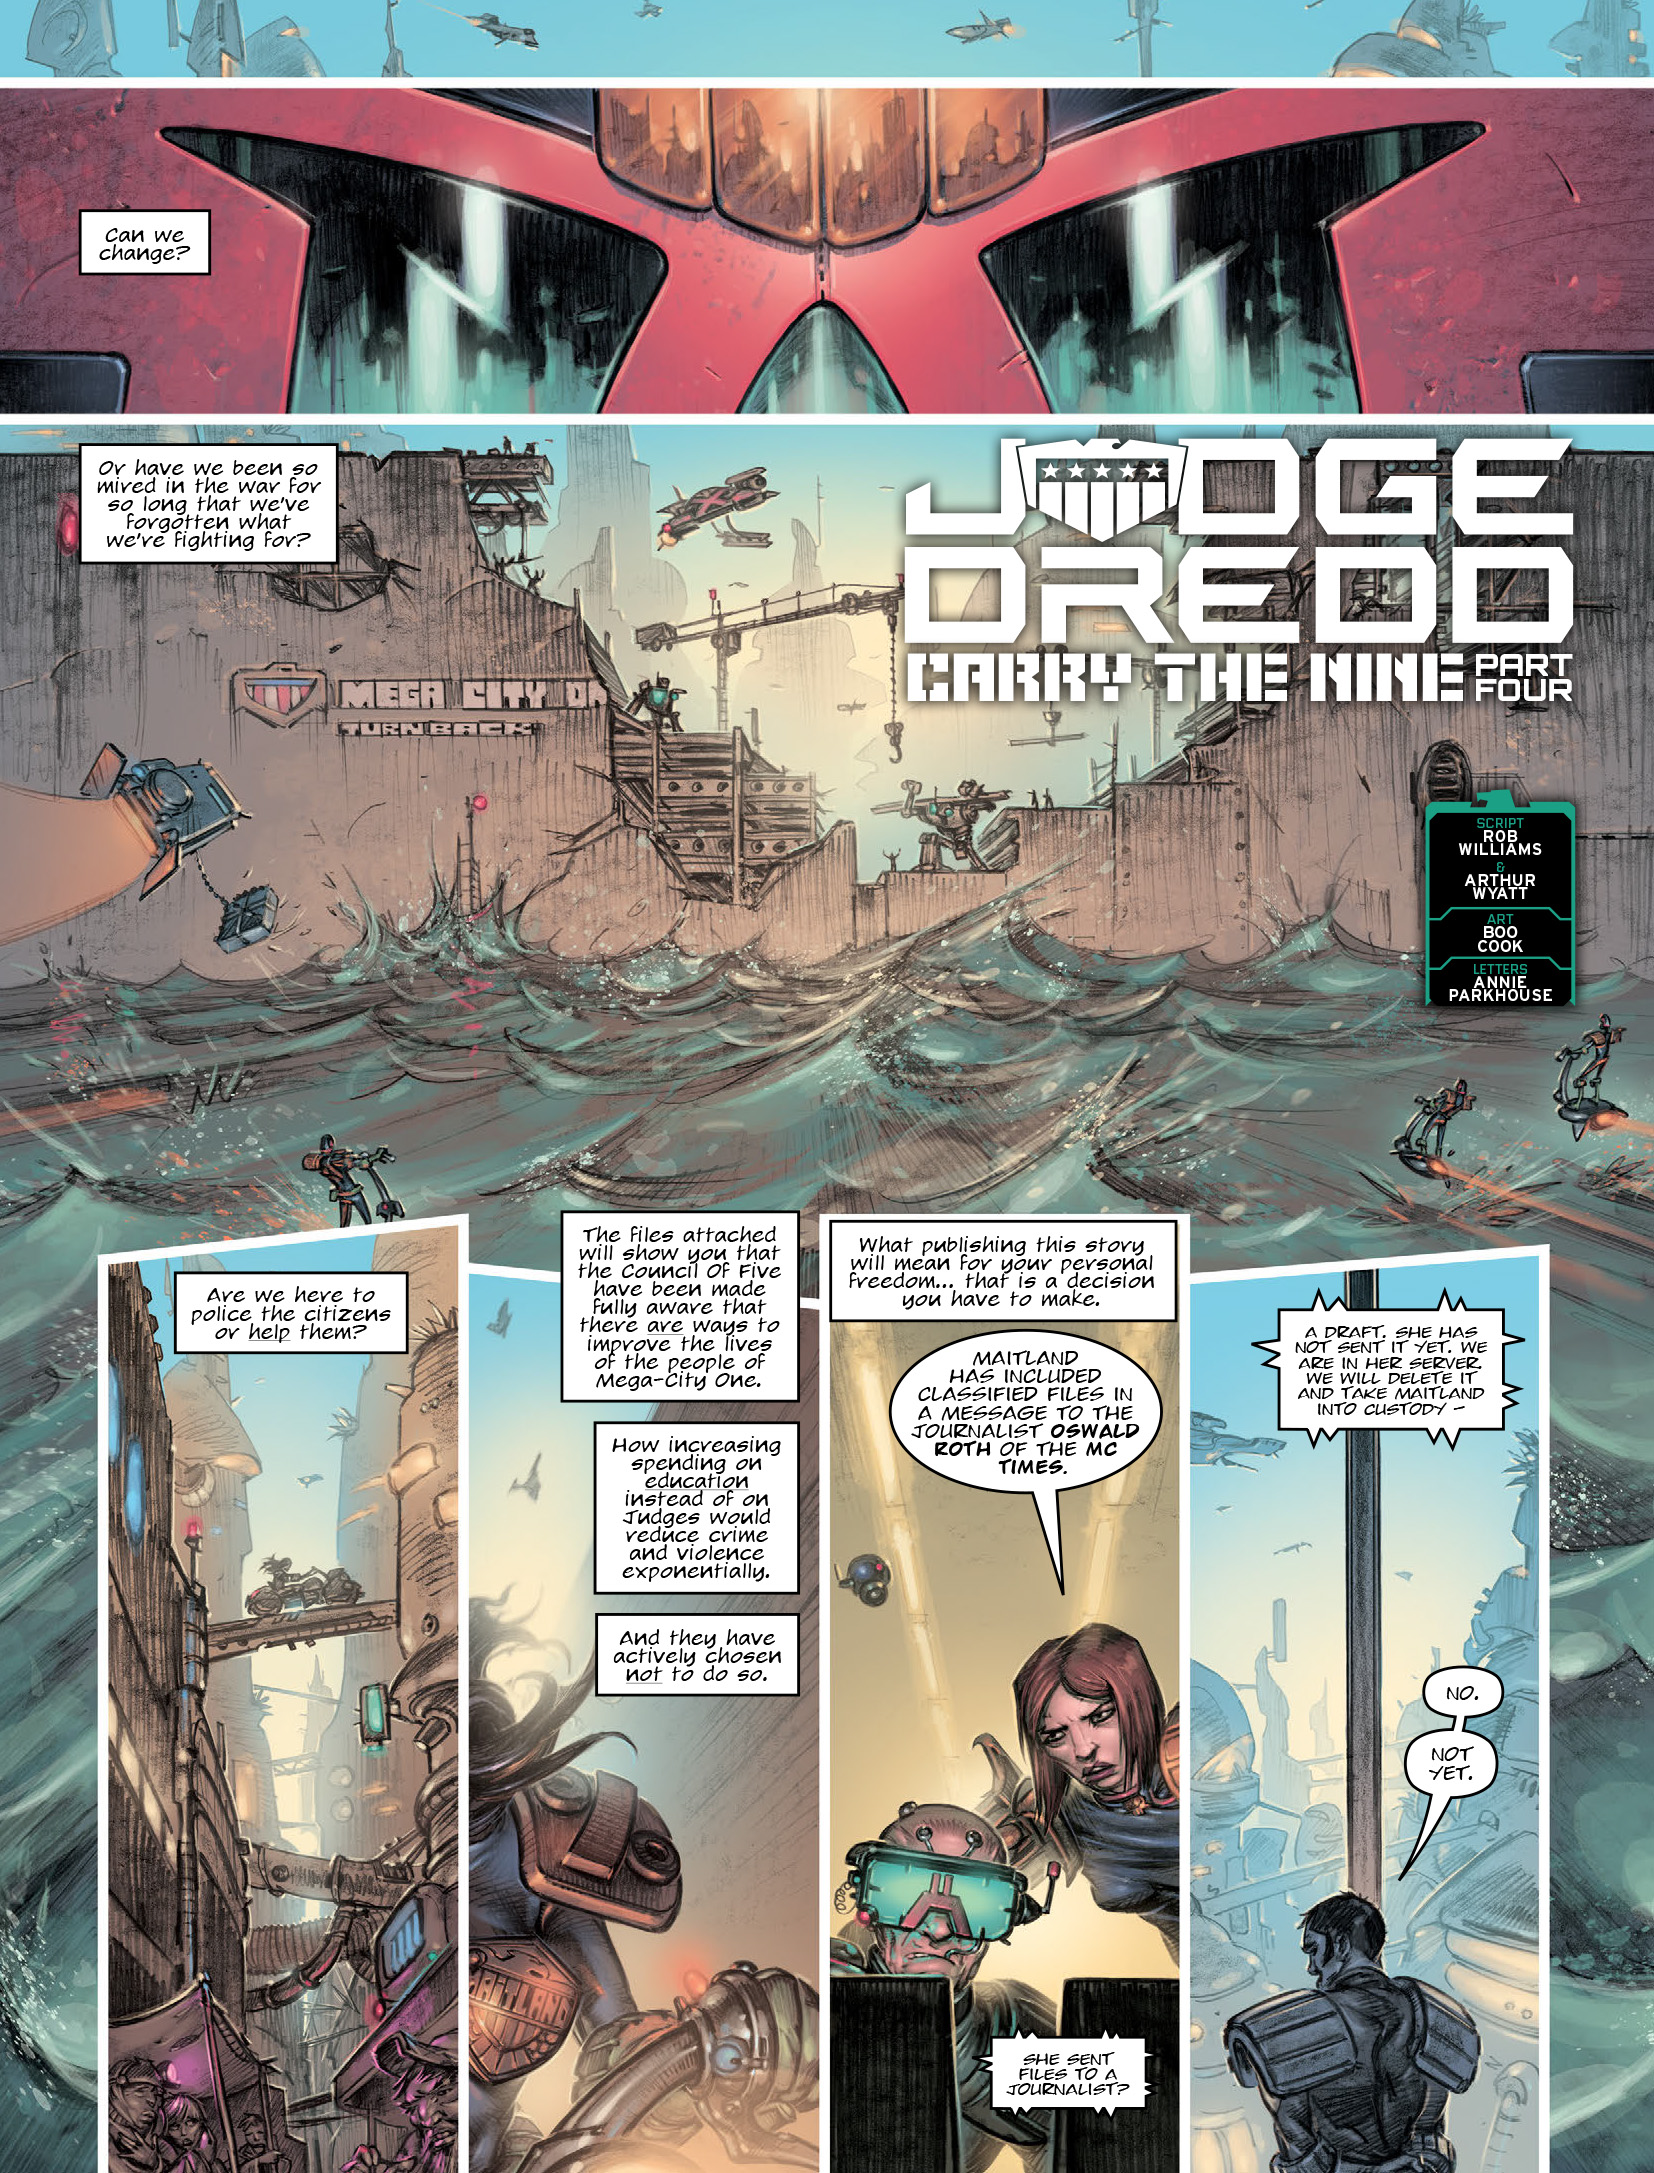 2000 AD: Chapter 2203 - Page 3